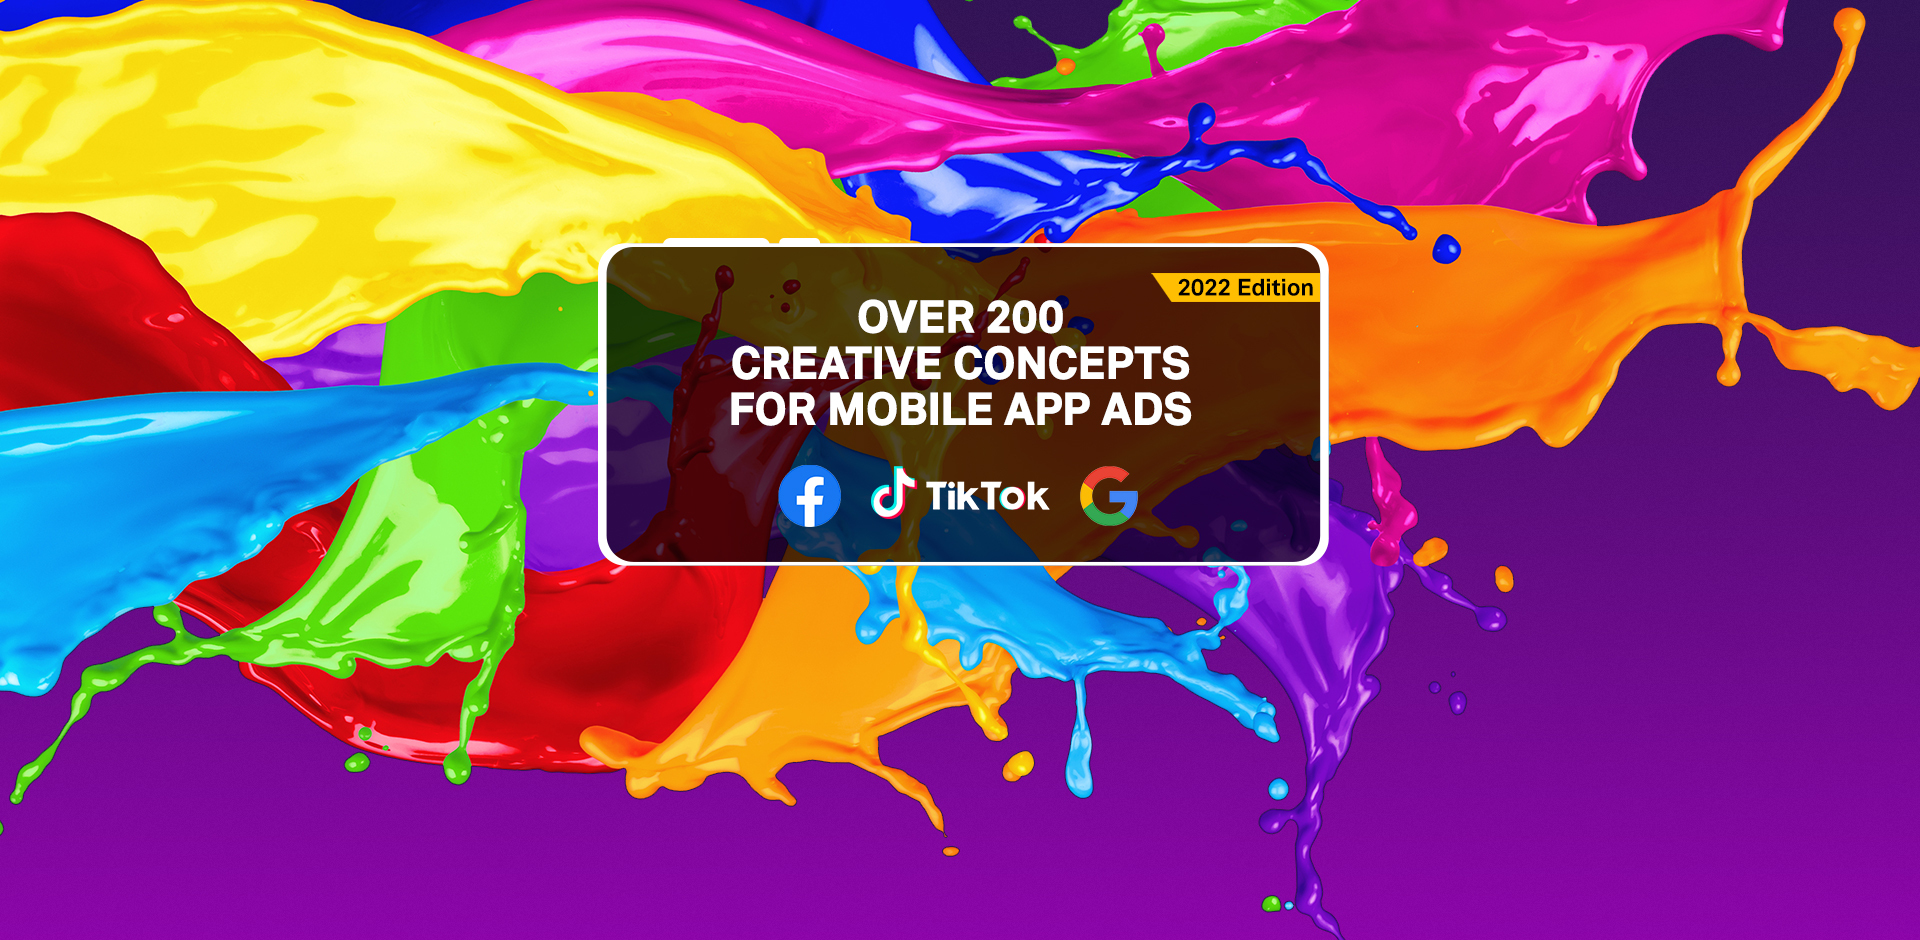 Over 200 Mobile App Ad Concepts for TikTok, Facebook, and Google Advertisers